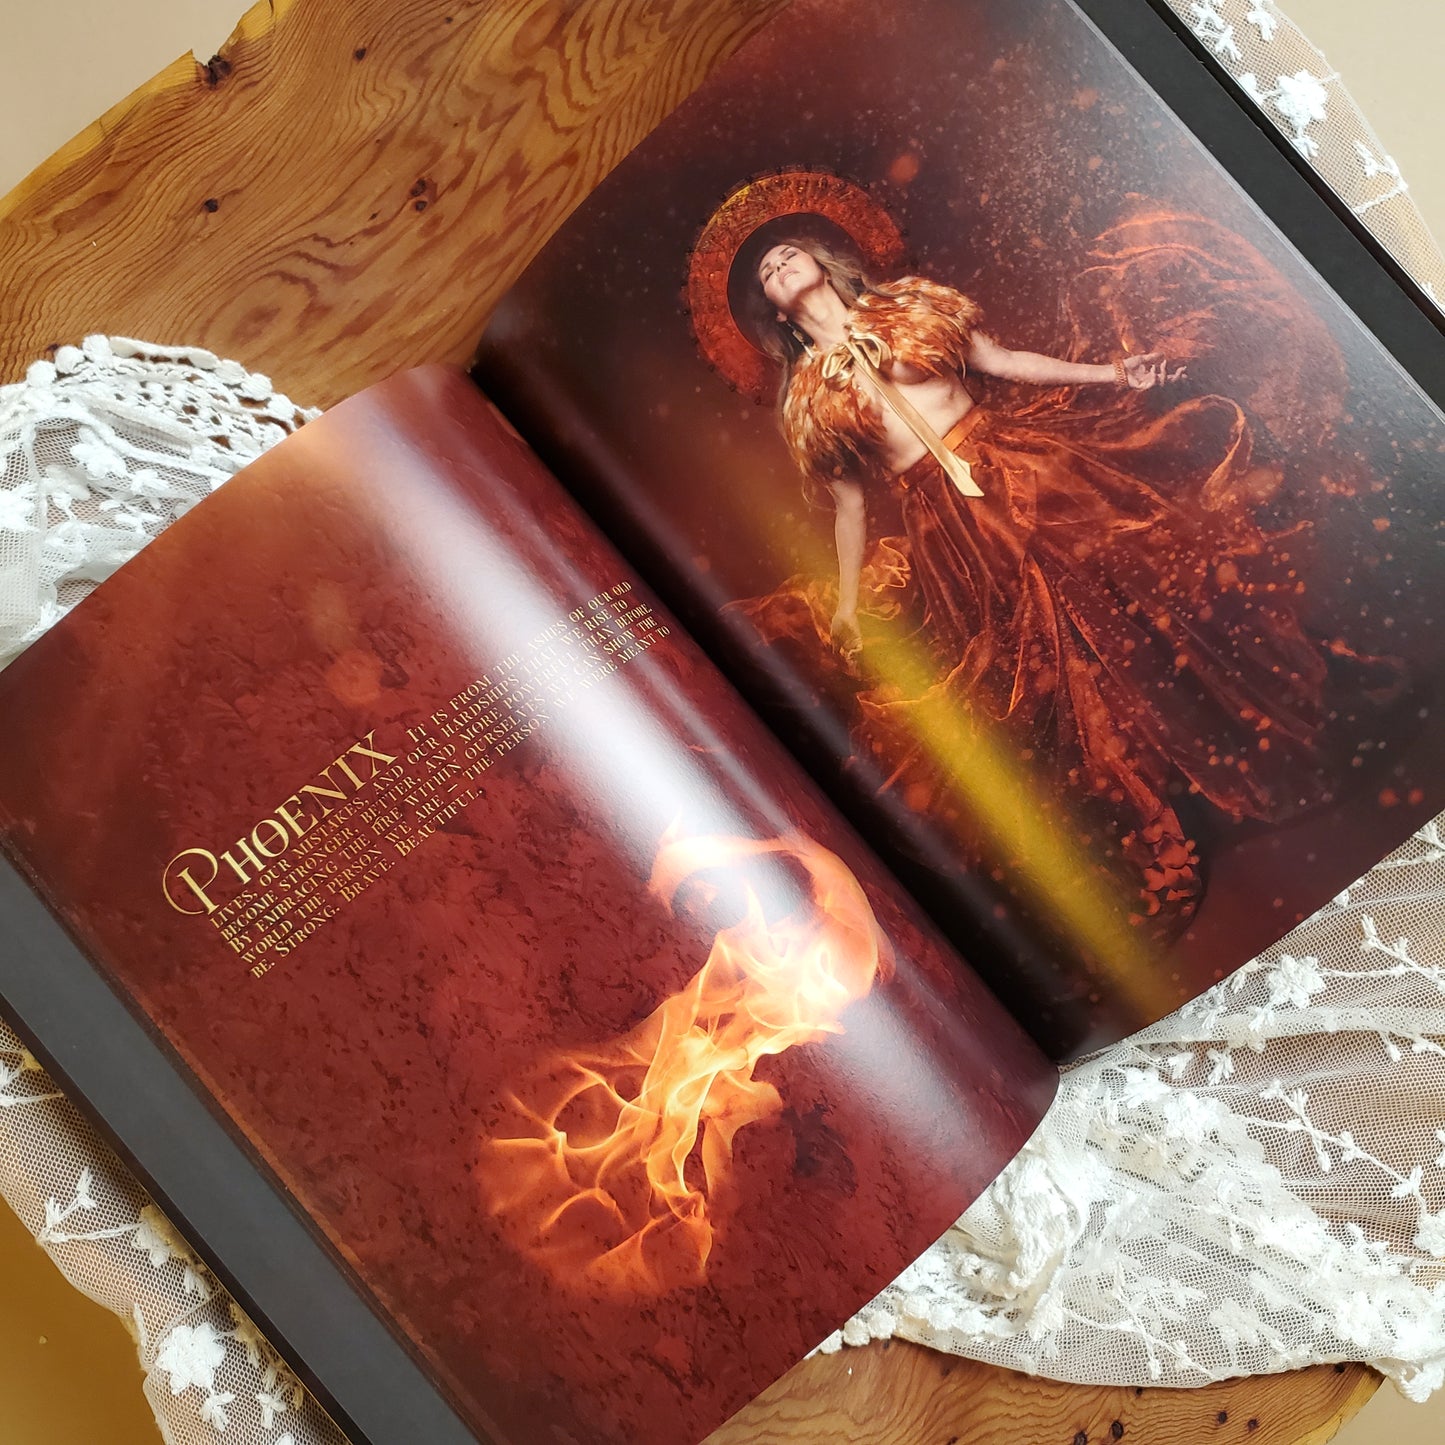 GODDESS: A photographer's visions of the feminine divine. Art book. [Signed Limited Edition]